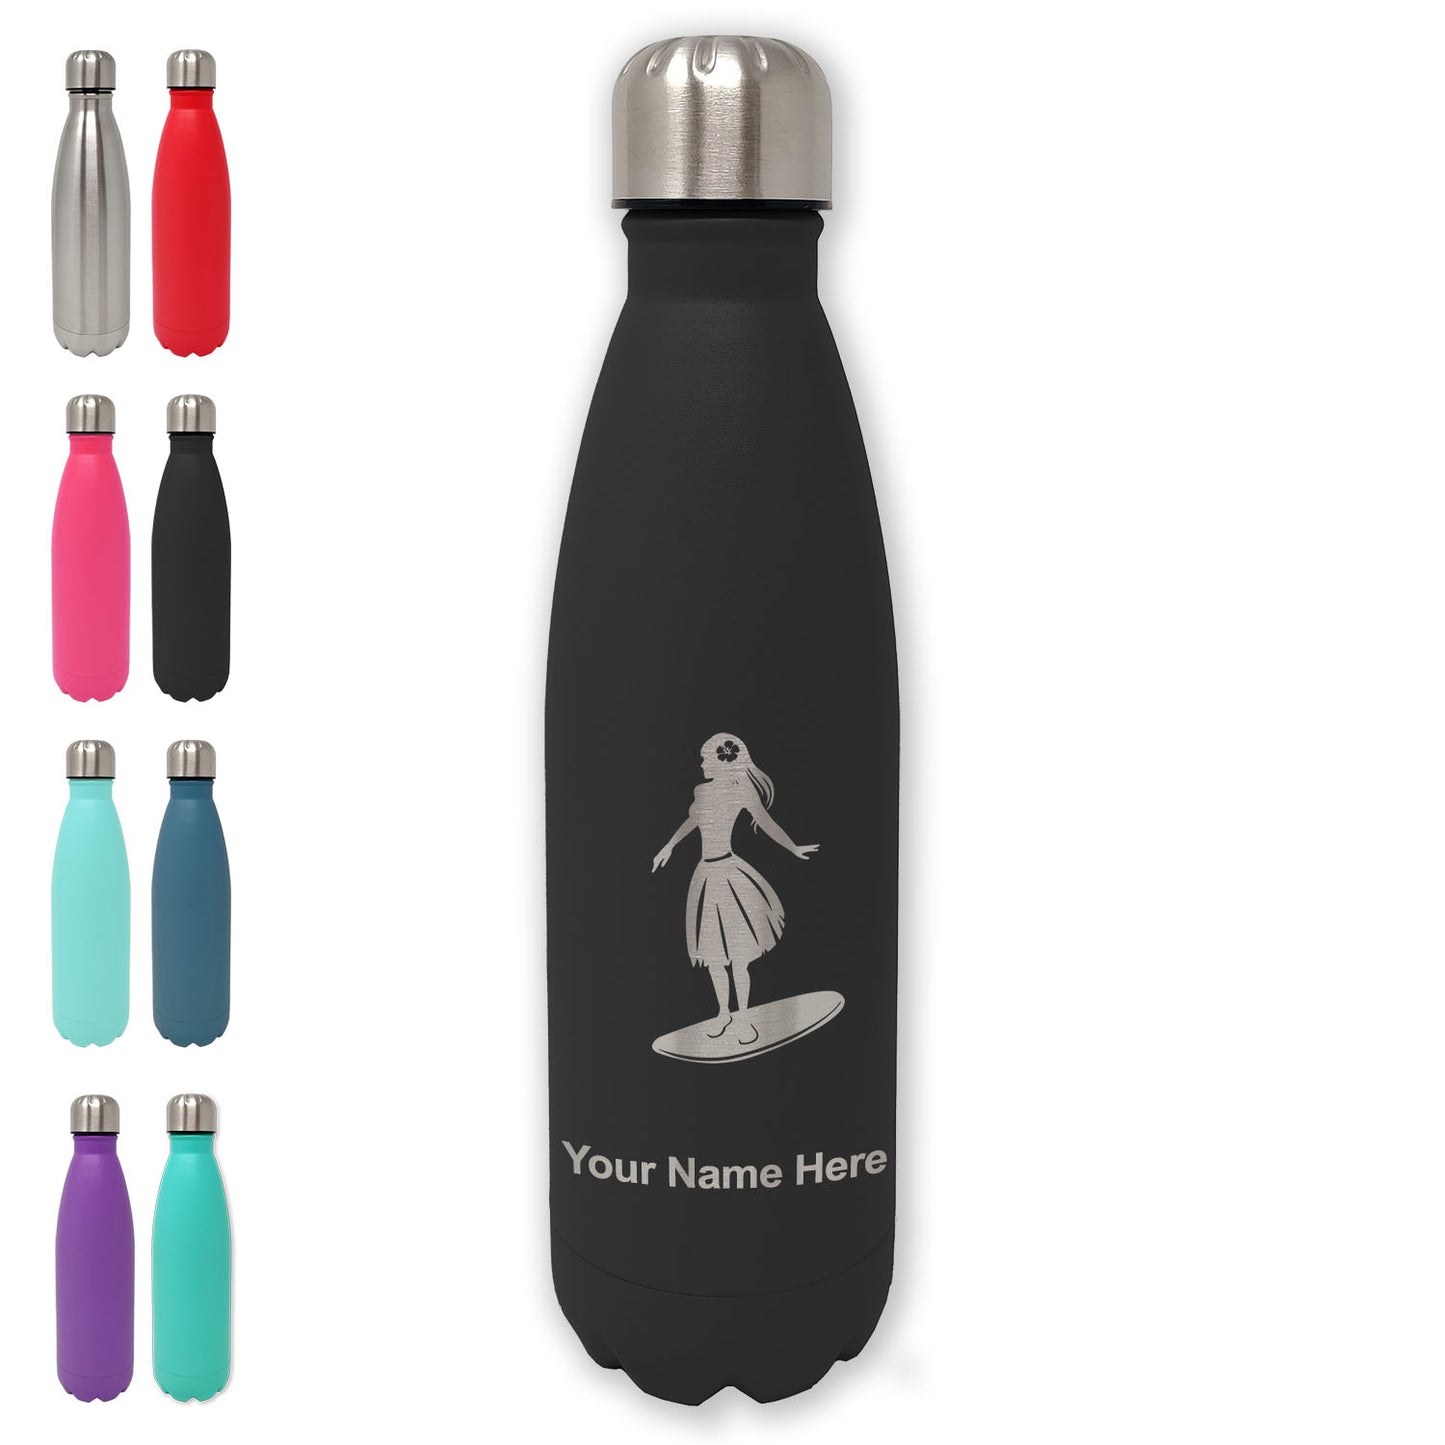 LaserGram Double Wall Water Bottle, Hawaiian Surfer Girl, Personalized Engraving Included